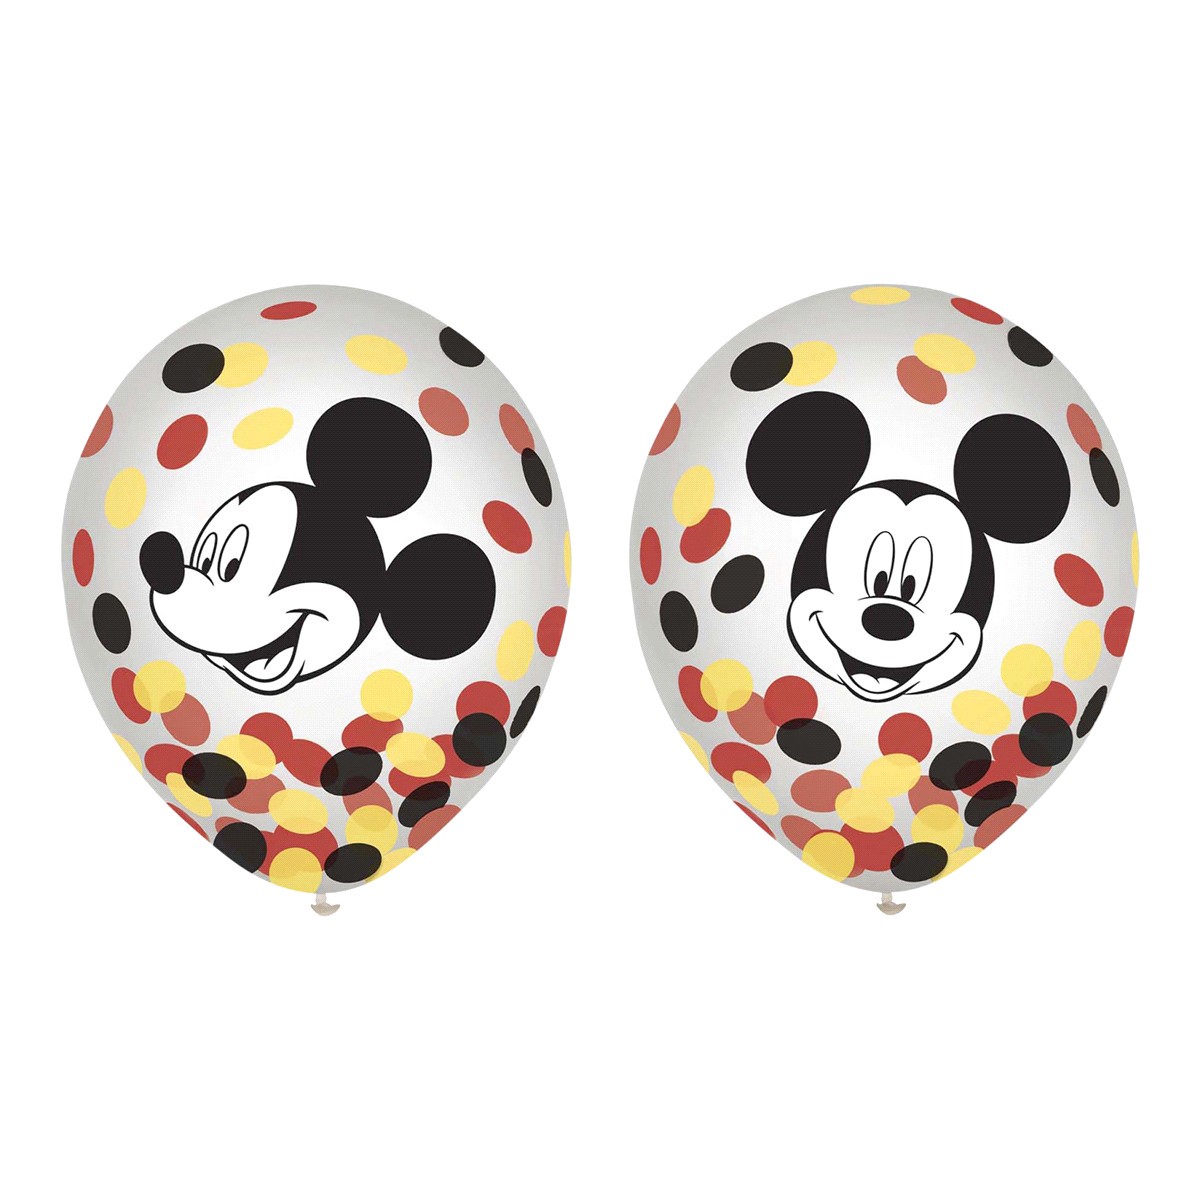 slide 1 of 1, These clear latex balloons feature Mickey's face and three are filled with black, red and yellow confetti., 6 ct